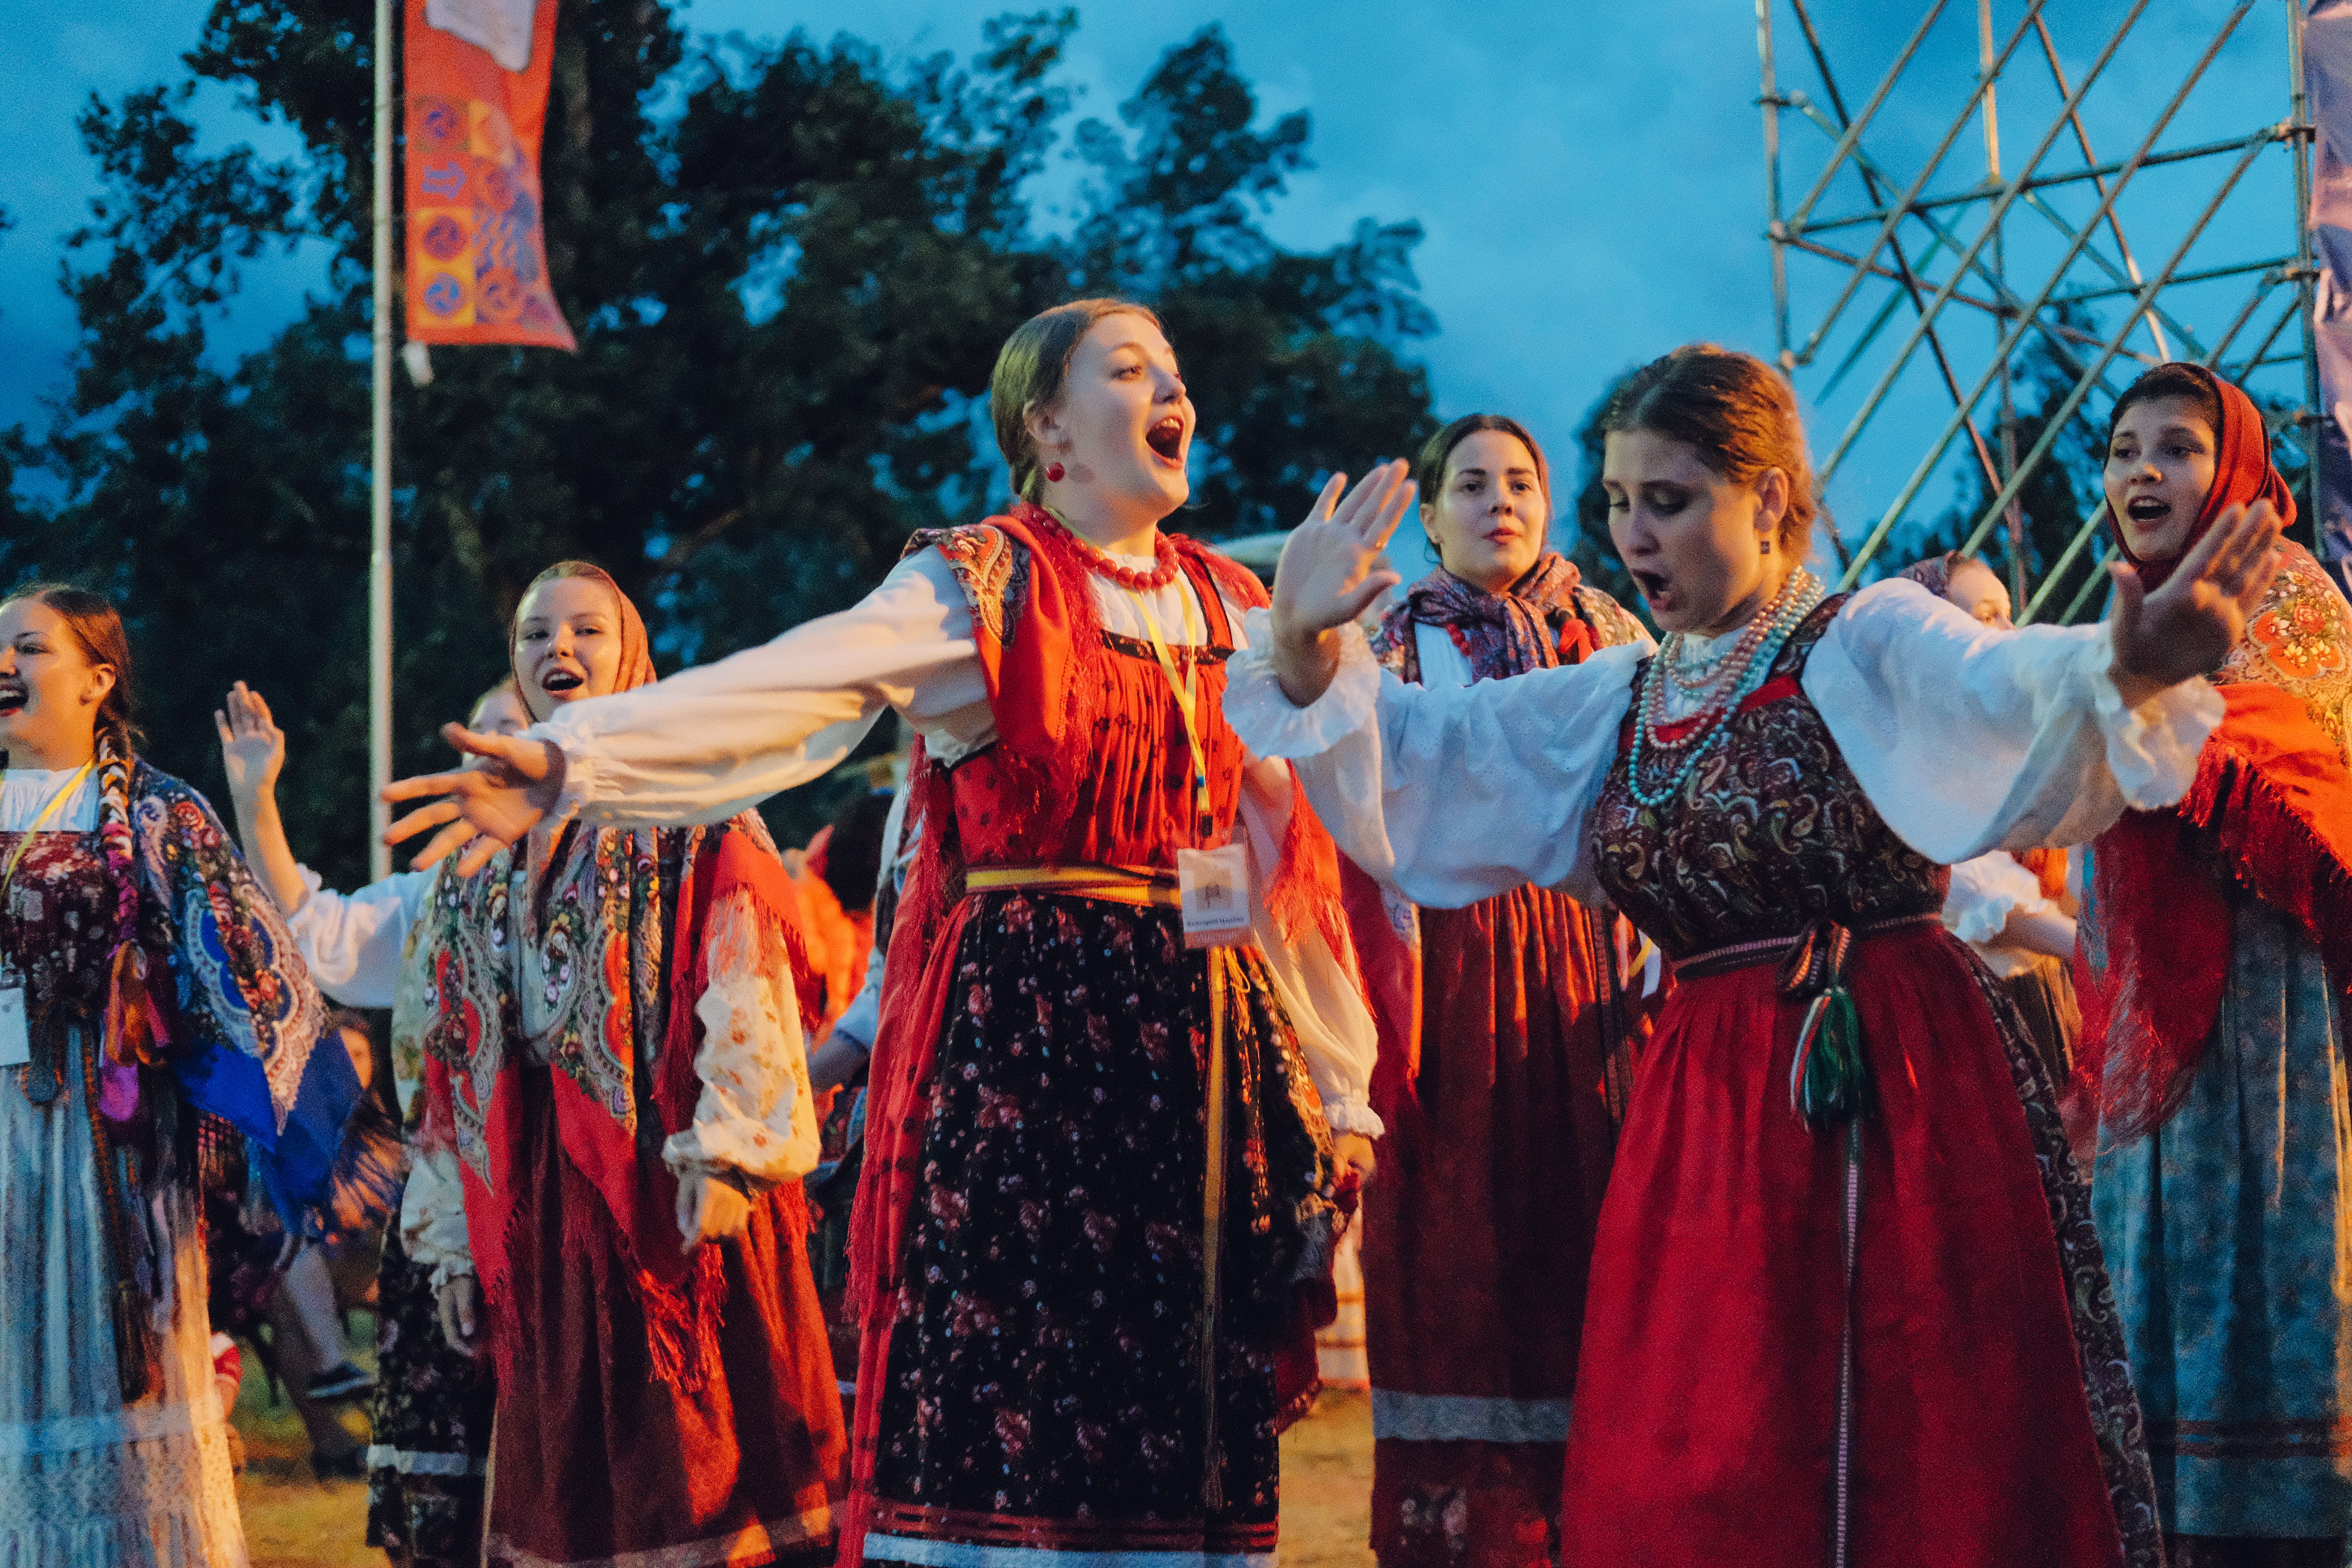 WORLD of Siberia Festival’s 2021 application submission for the Crafts Award Competition and the World Music Award Competition has been closed